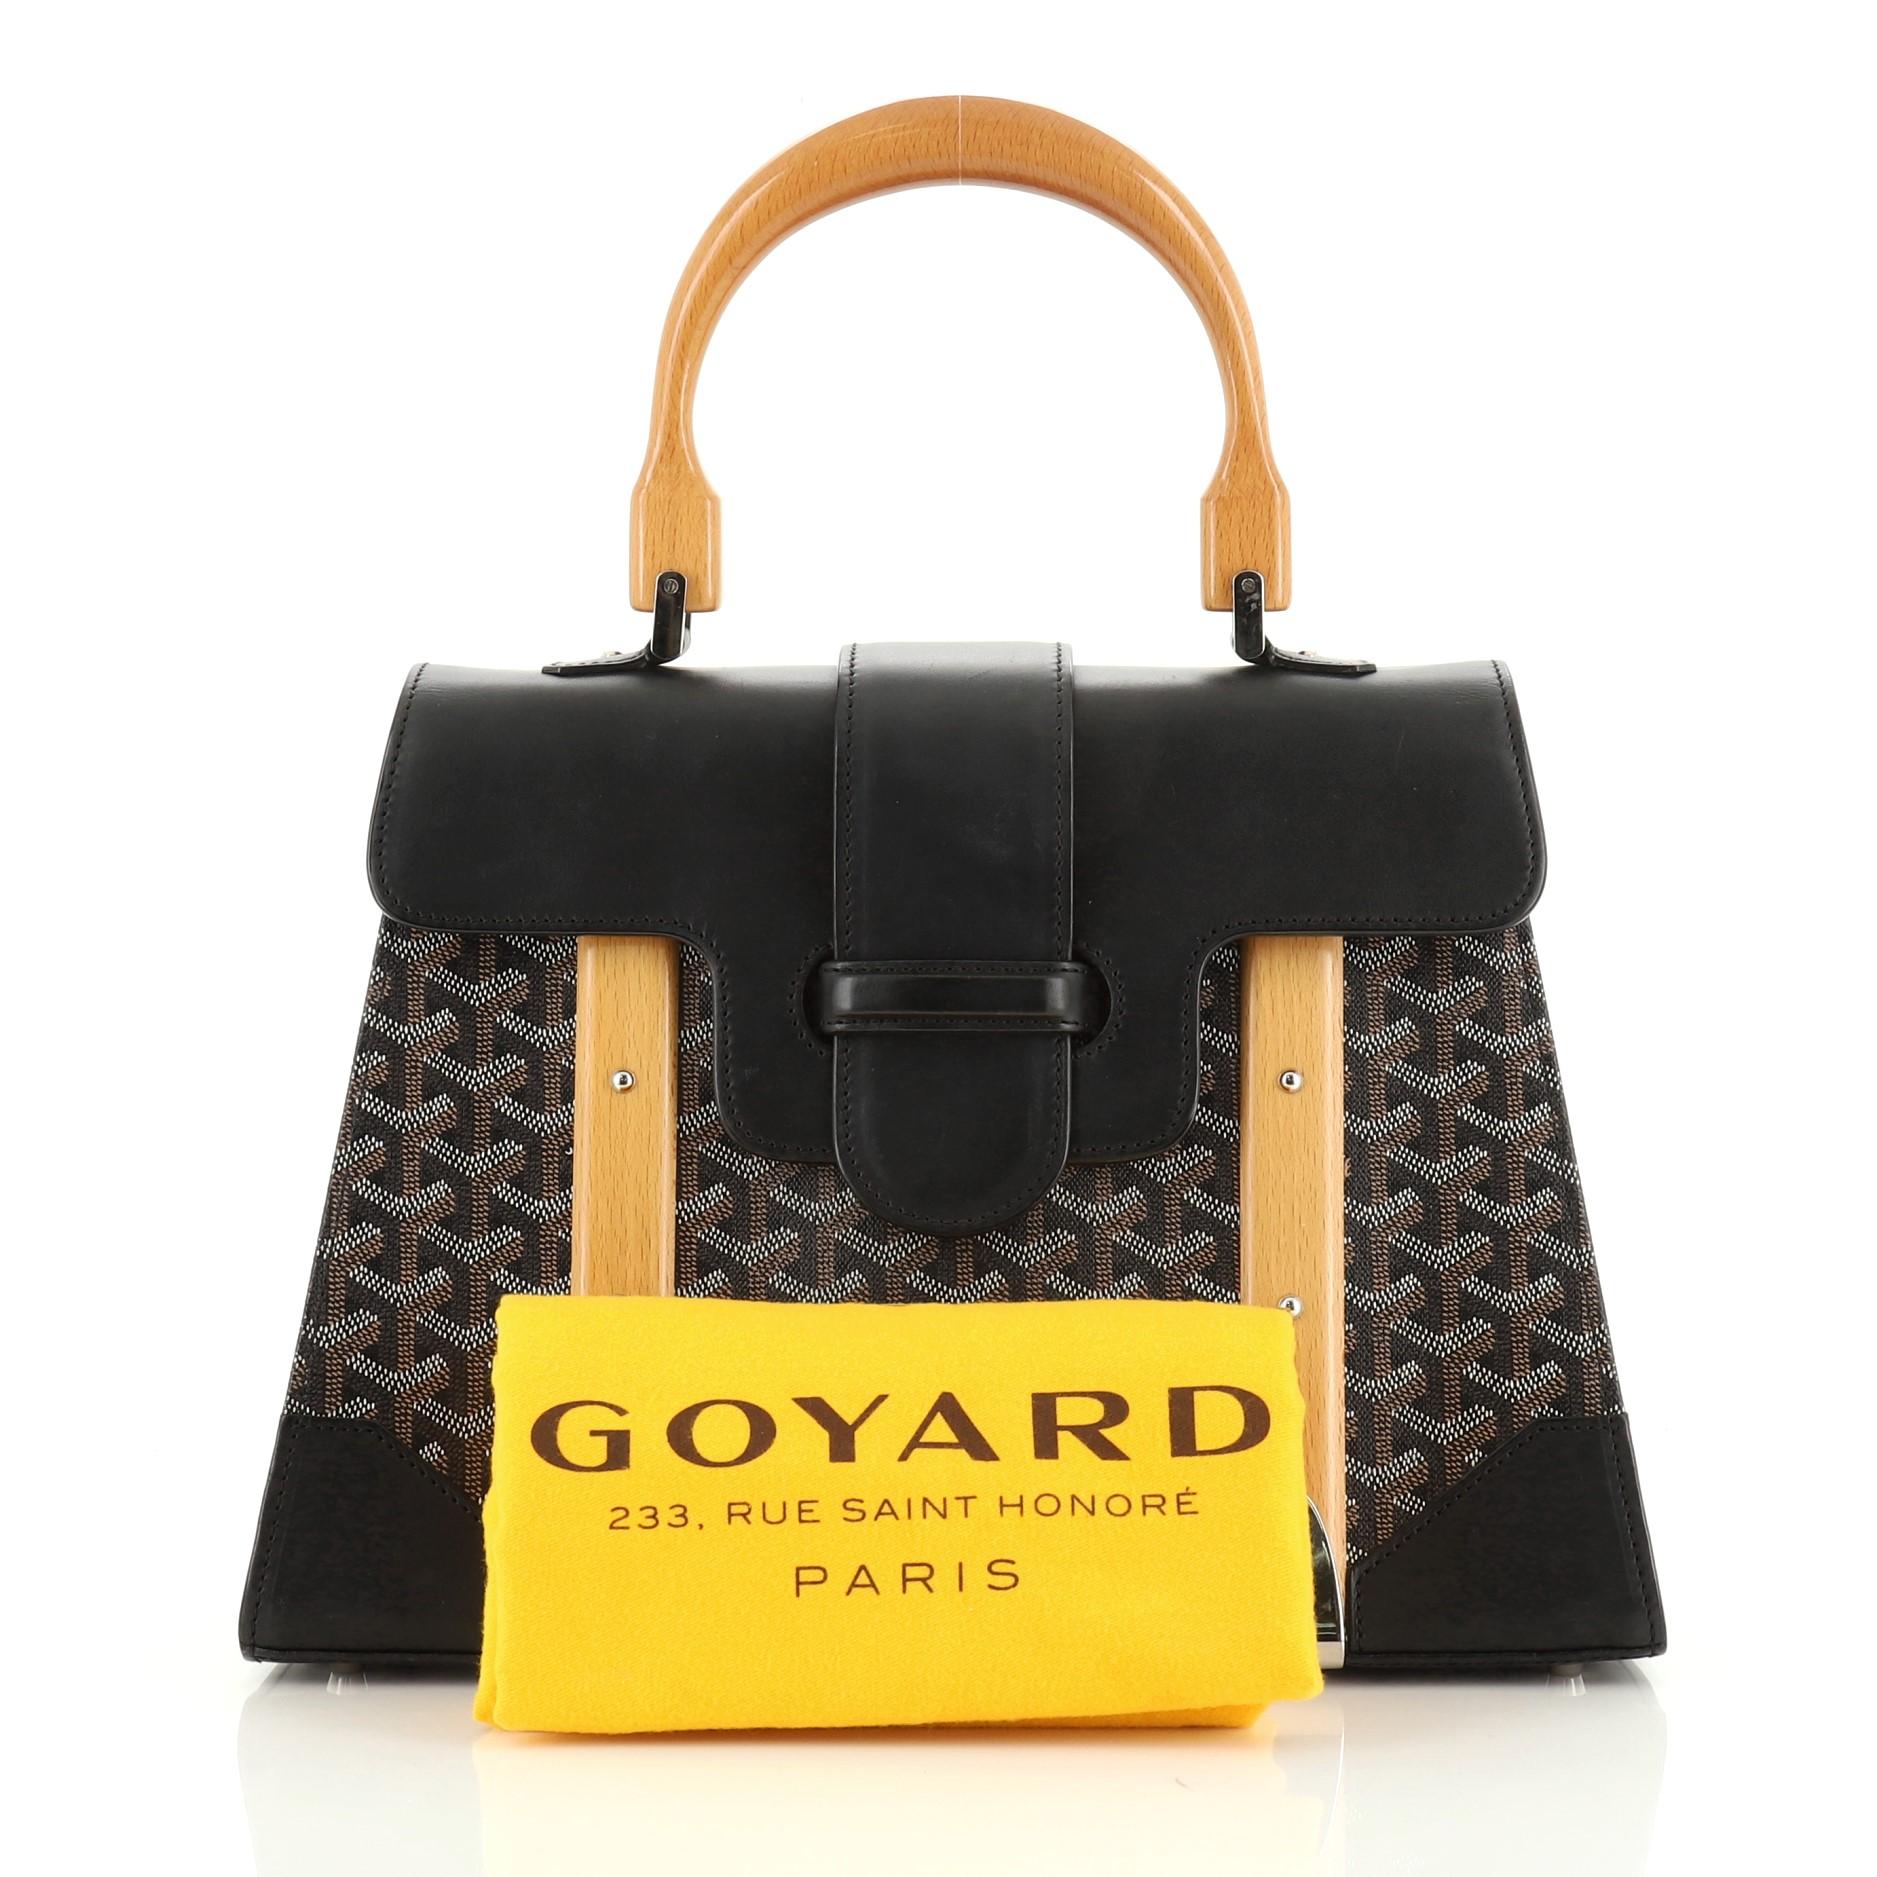 This Goyard Saigon Top Handle Bag Coated Canvas with Leather MM, crafted in black coated canvas with leather, features a single looped wood handle, wood details, protective base studs, and silver-tone hardware. Its flap slide closure opens to an